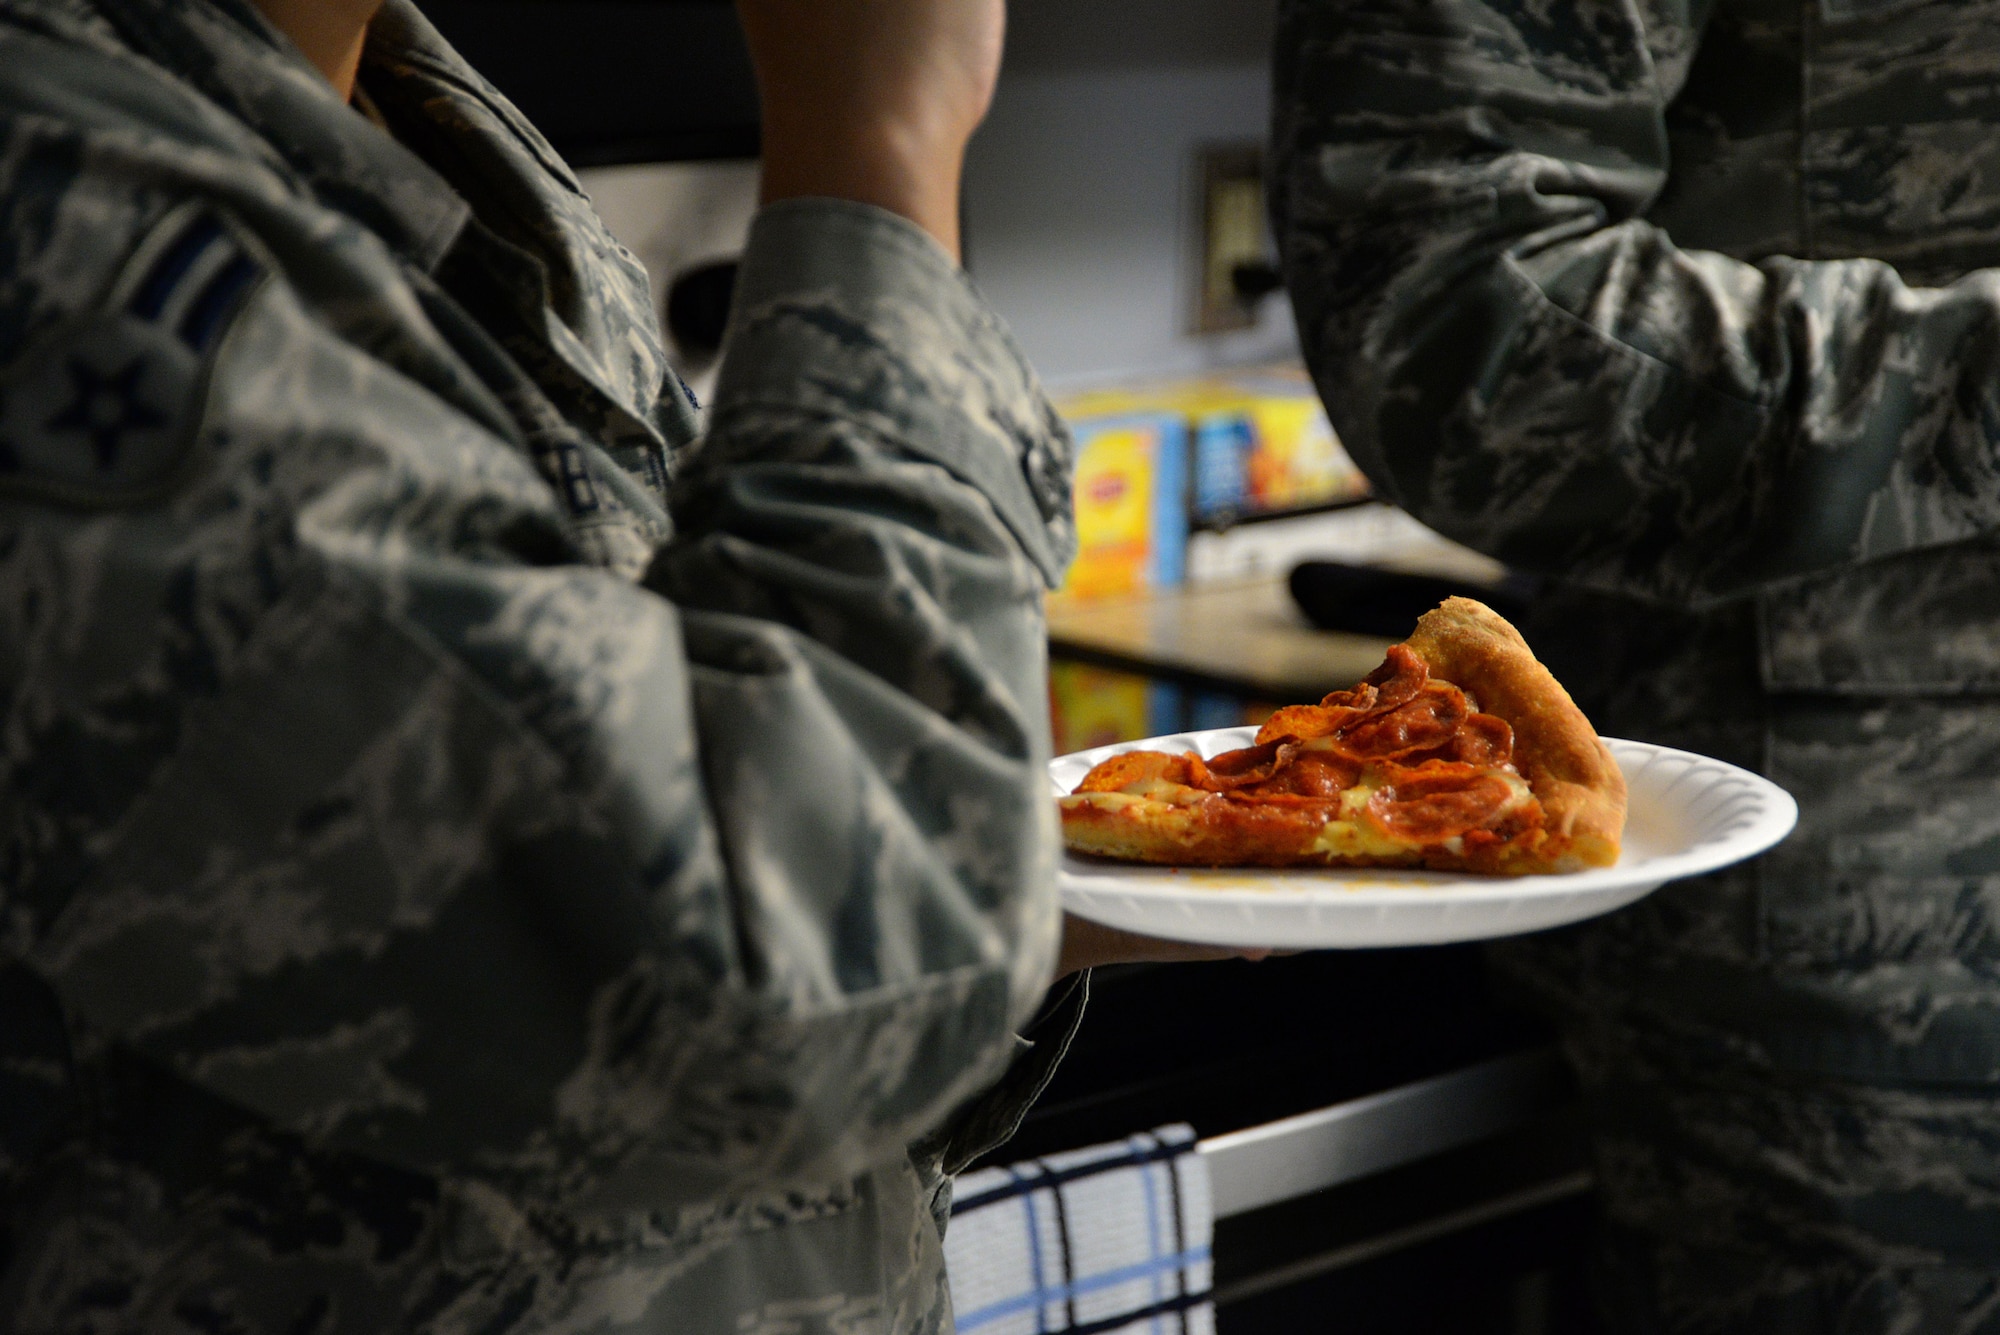 Airman 1st Class Patricia Hebert, 81st Engineering Installation Squadron radio frequency transmissions technician, eats pizza during the Haven reopening Dec. 21, 2017, on Keesler Air Force Base, Mississippi. Keesler’s private organizations came together to remodel and reopen the Haven to improve the dorm common area for Keesler’s dorm residents. (U.S. Air Force photo by Airman 1st Class Suzanna Plotnikov)